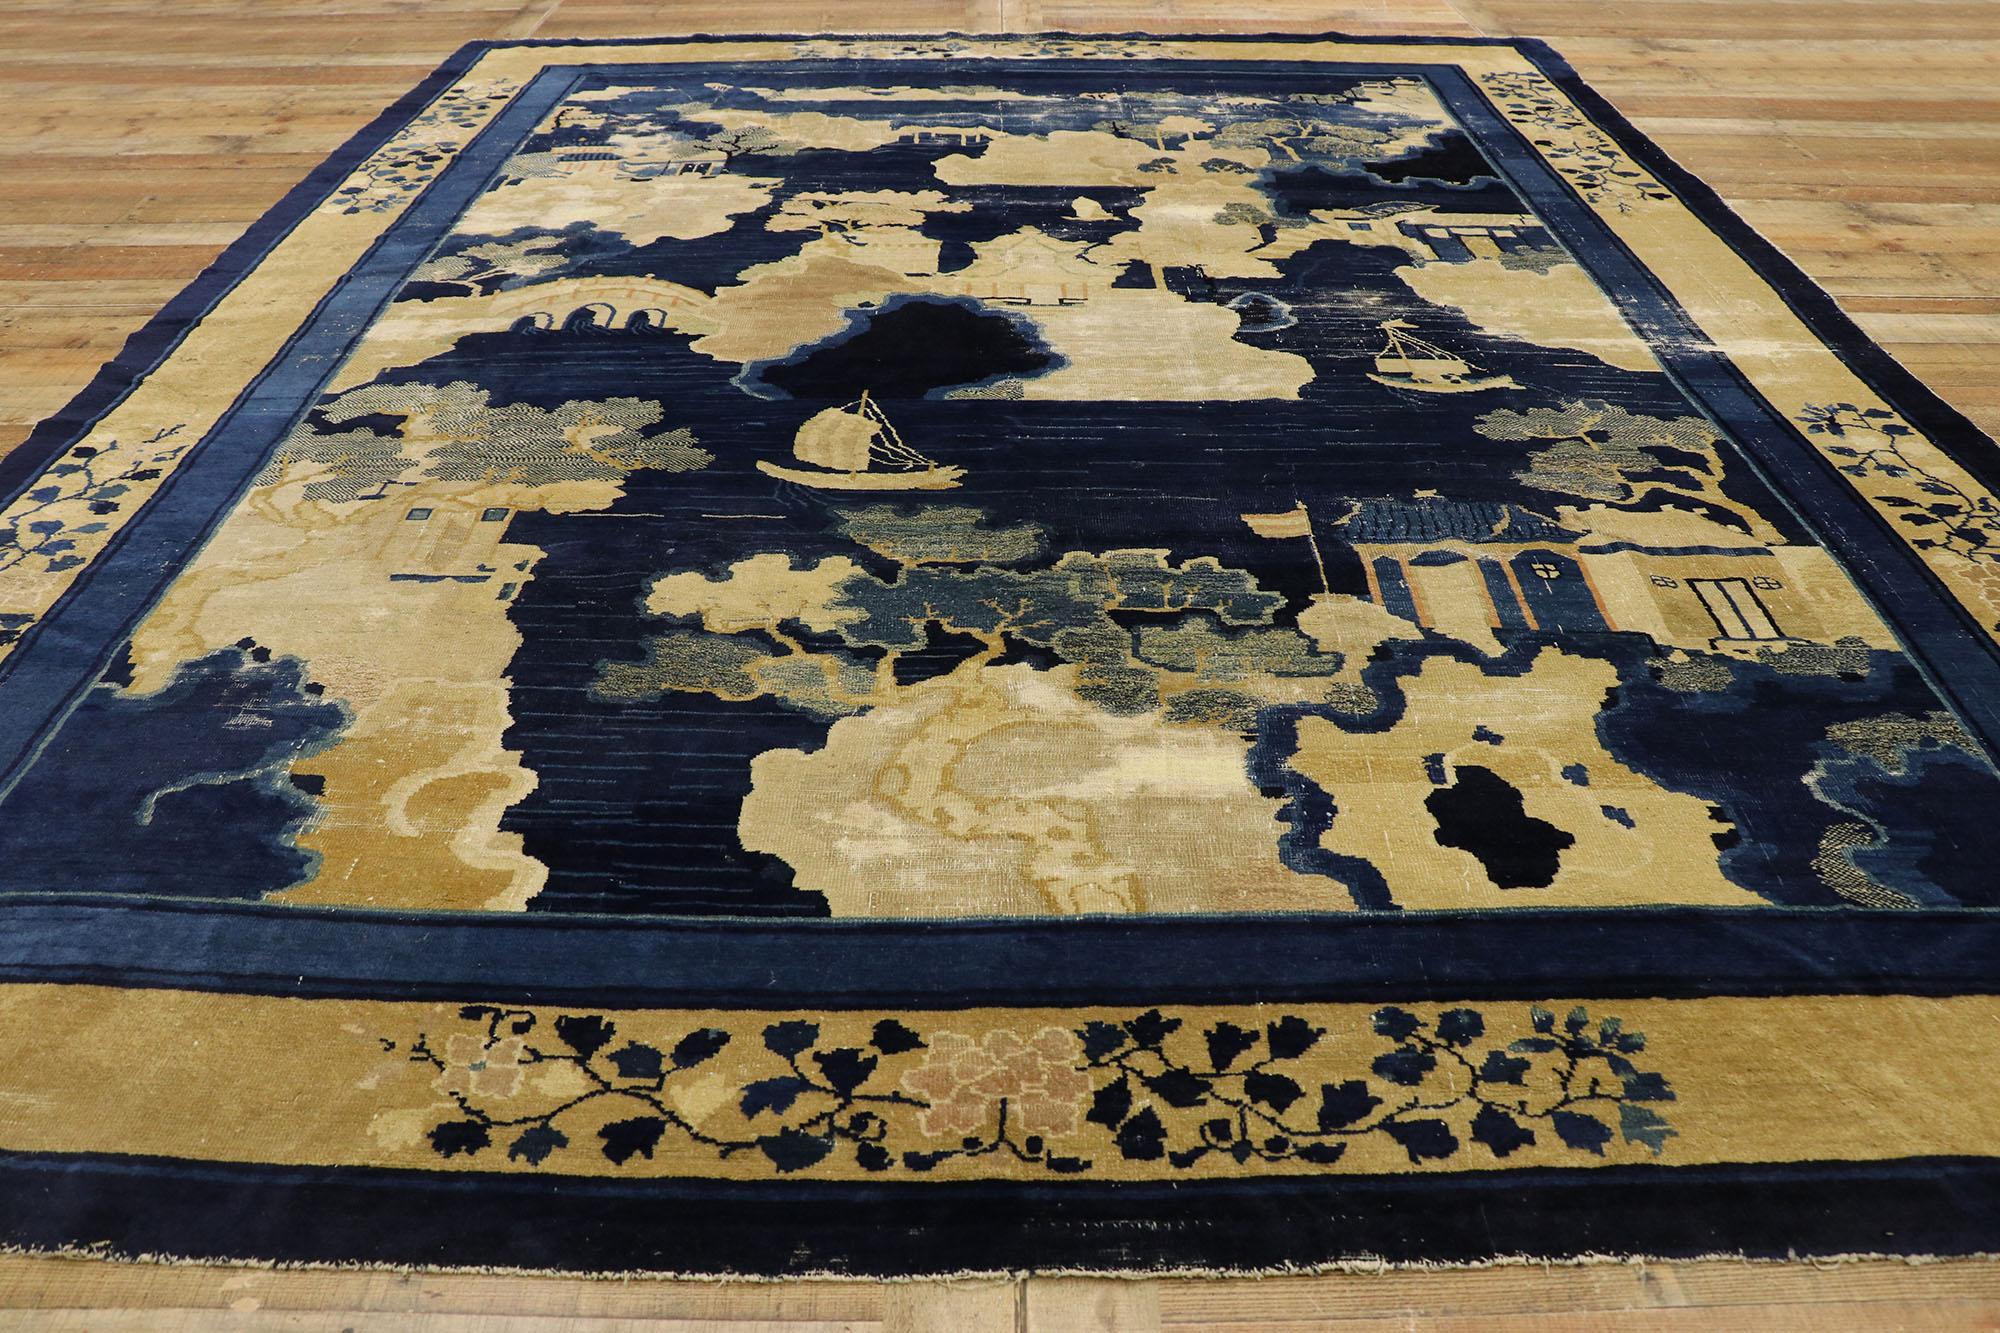 Distressed Antique Chinese Baotou Pictorial Rug with Landscape Design 1